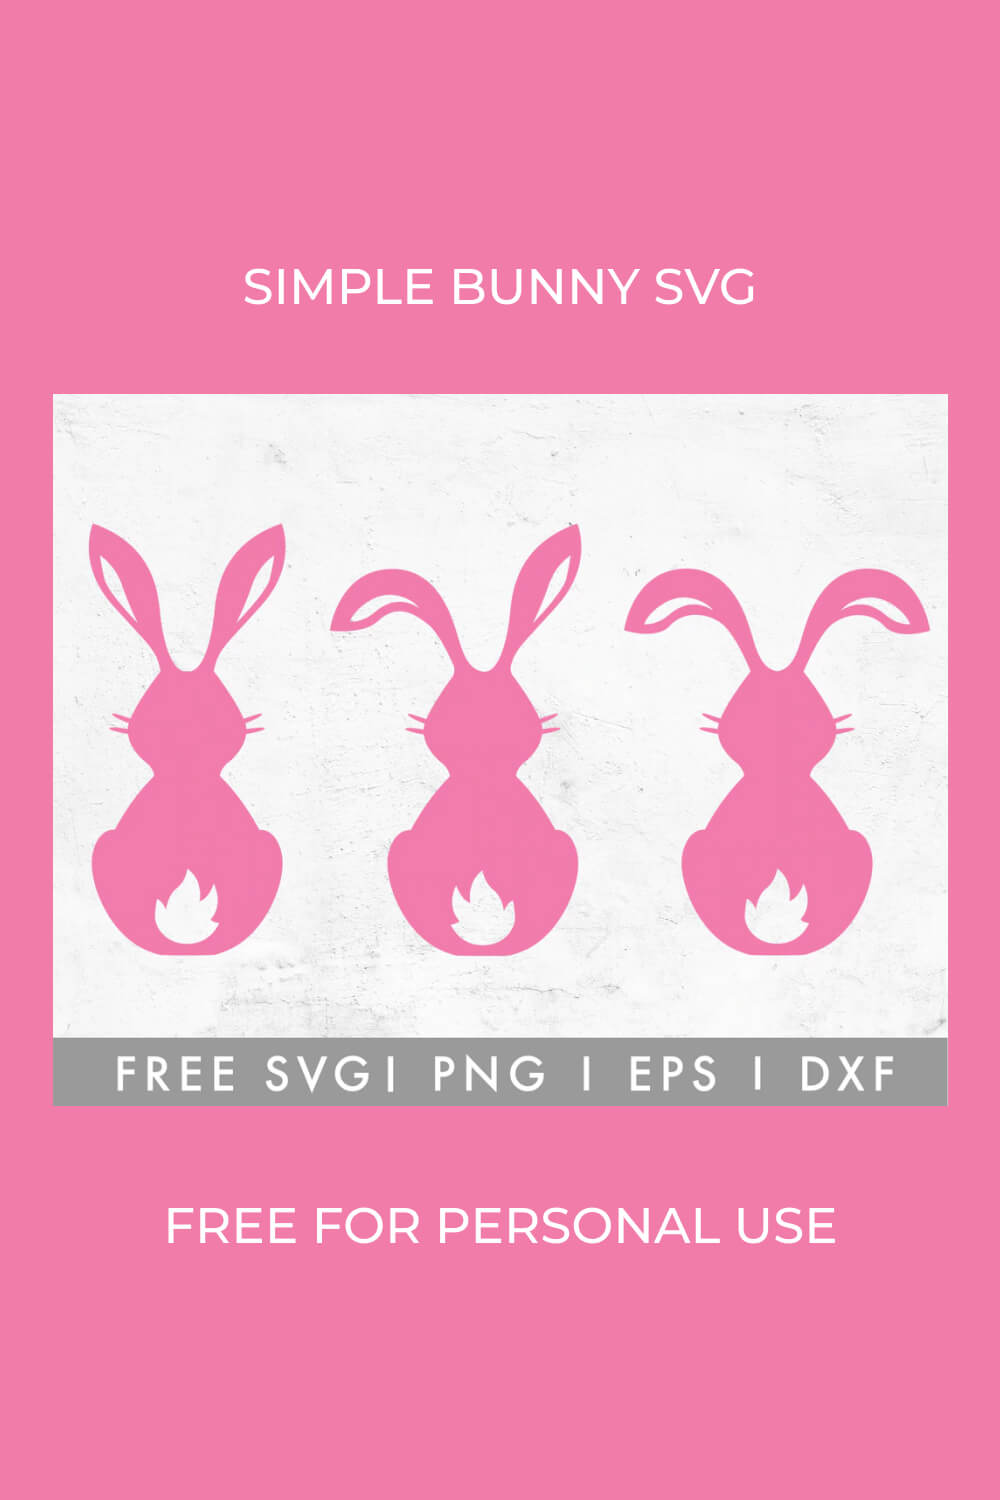 Free Images with Pink Bunnies SVG, PNG, EPS and DXF.